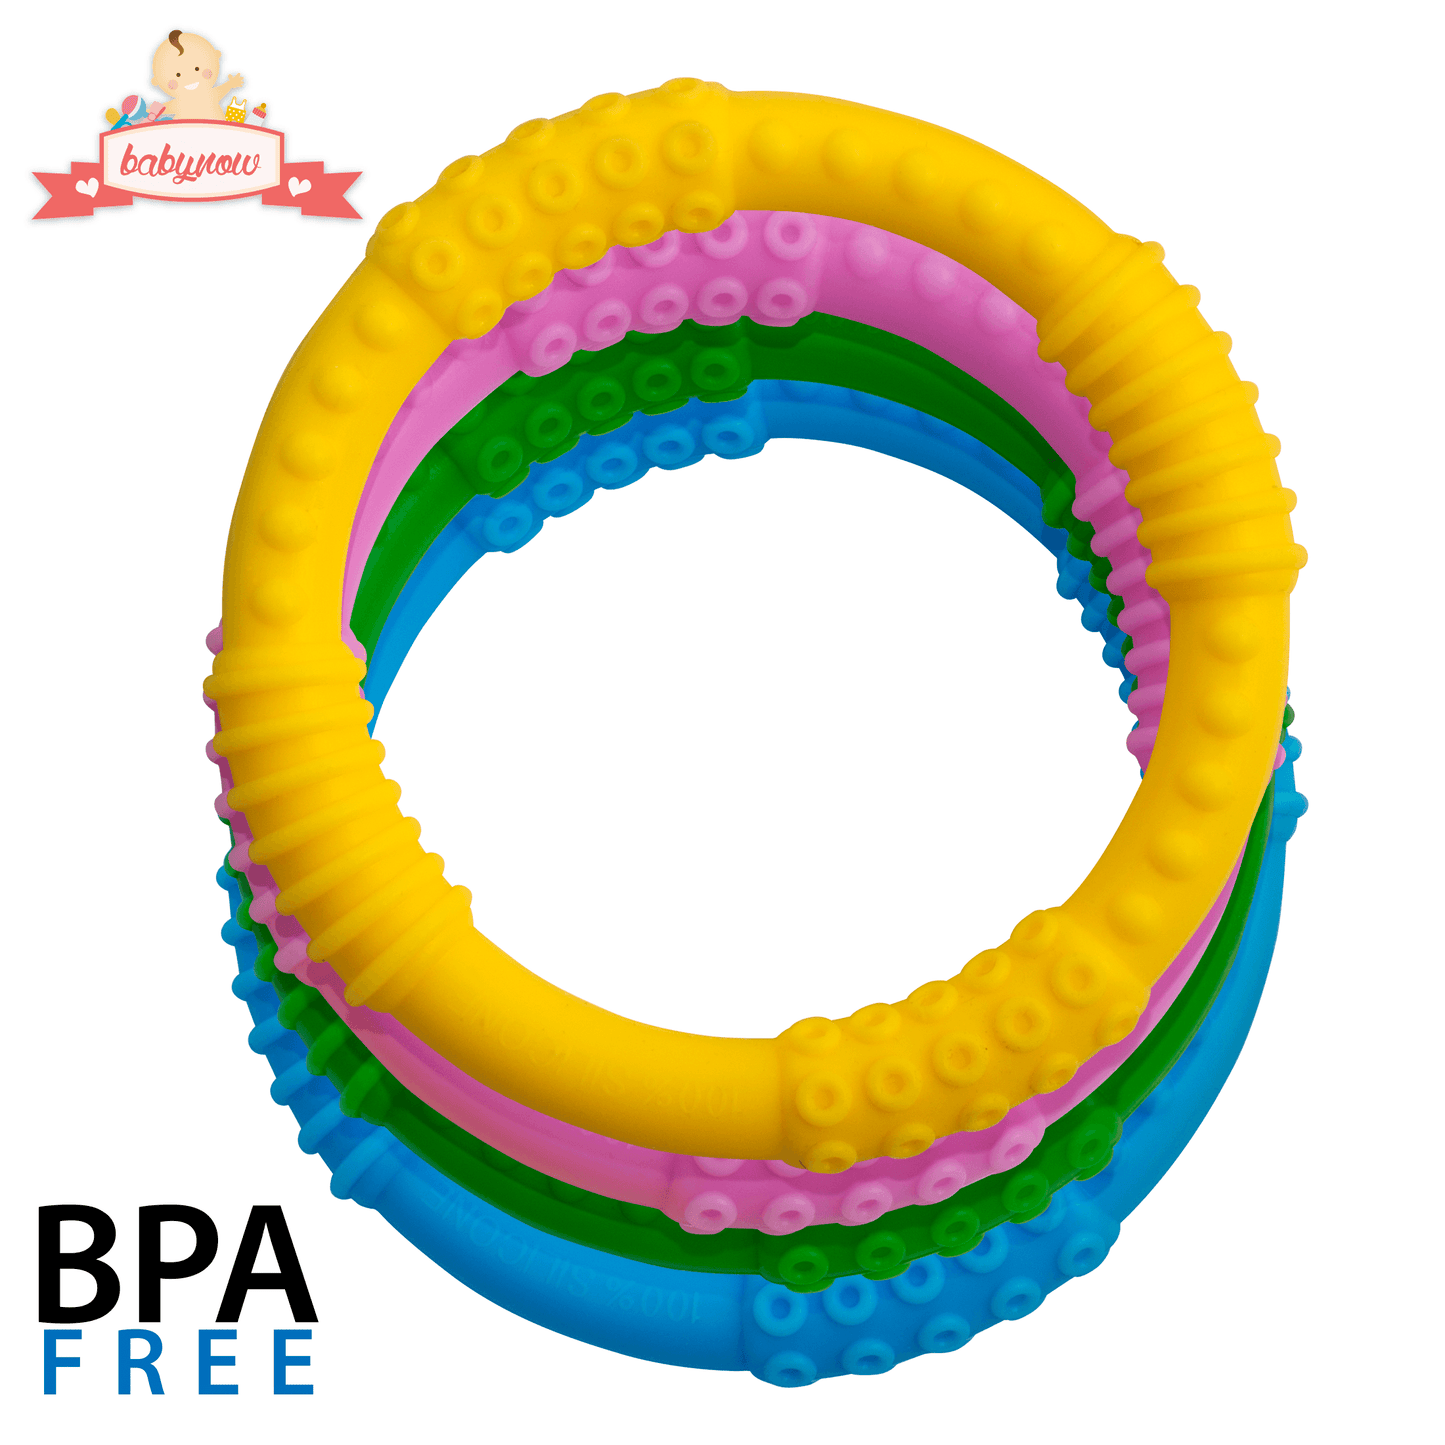 BABY Teething Rings 4 PACK Silicone Teether Pacifier Chew Toy Ring